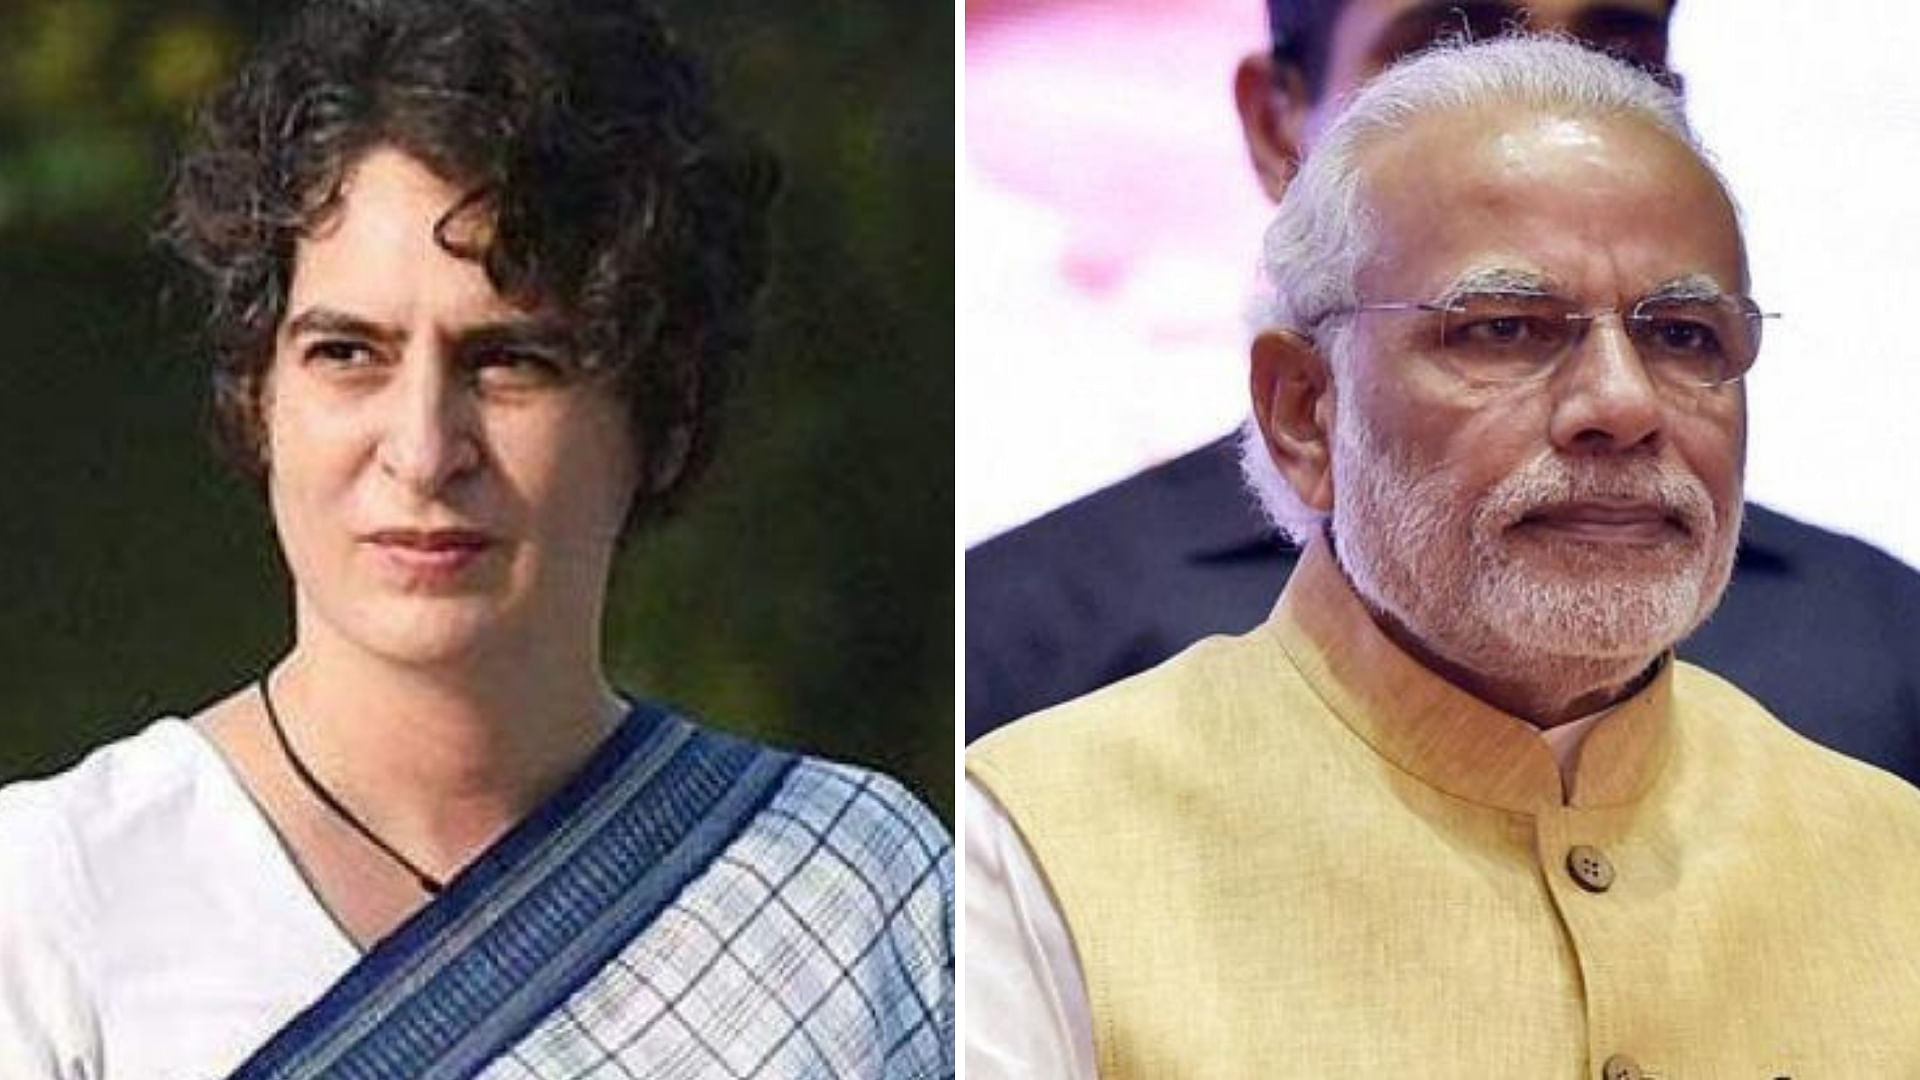 PM Modi’s comments are being seen as a jibe on Priyanka Gandhi’s entry into active politics.